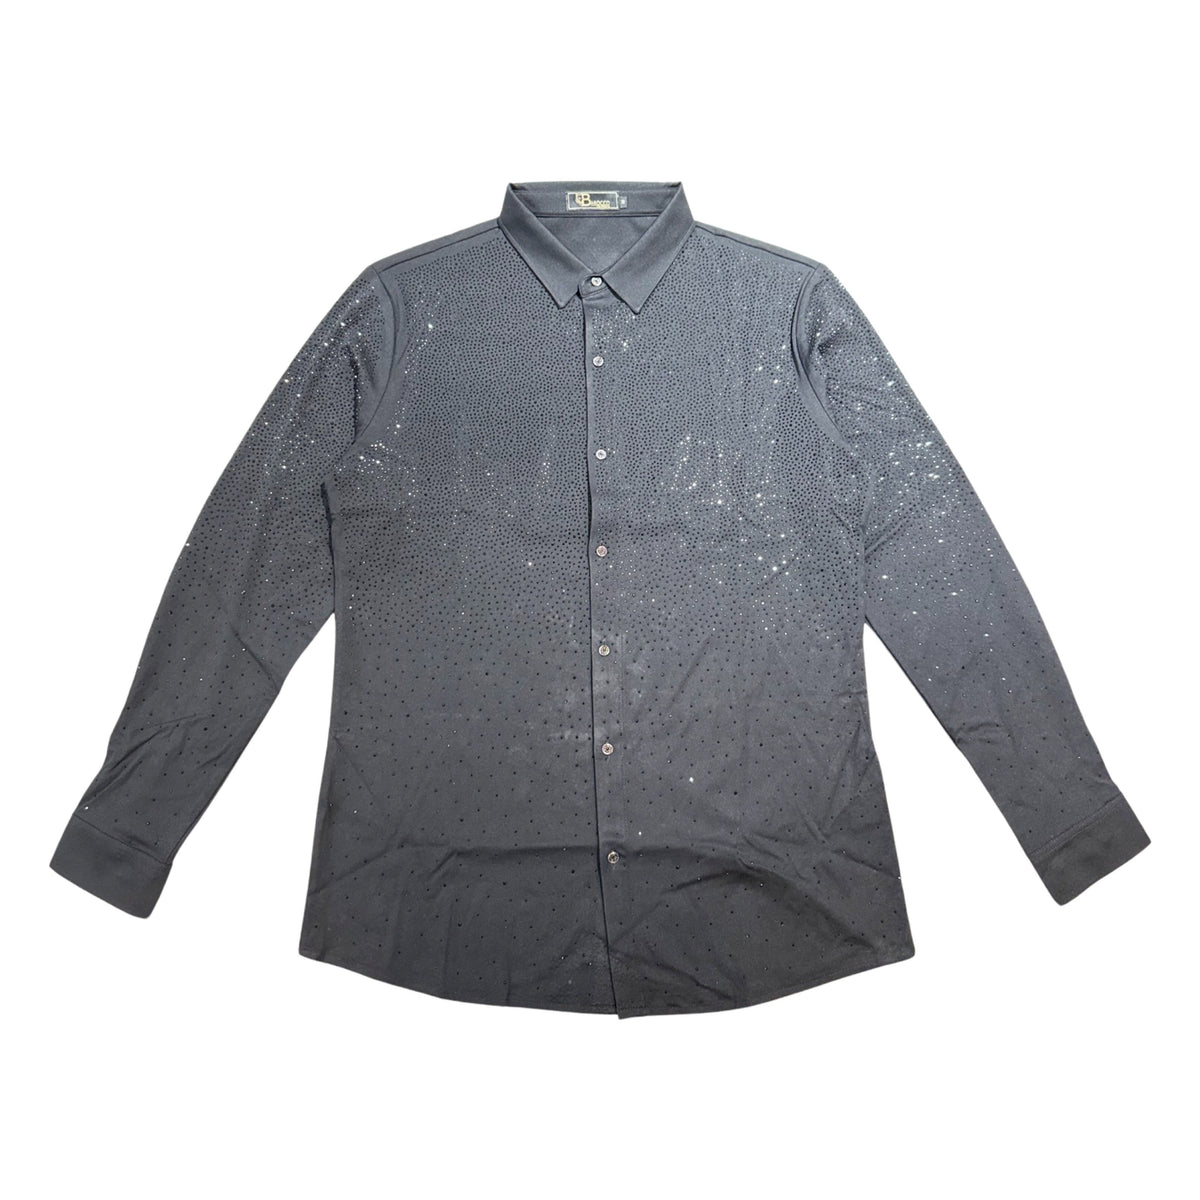 Barocco Black/Black All Over Crystal Button Up Shirt